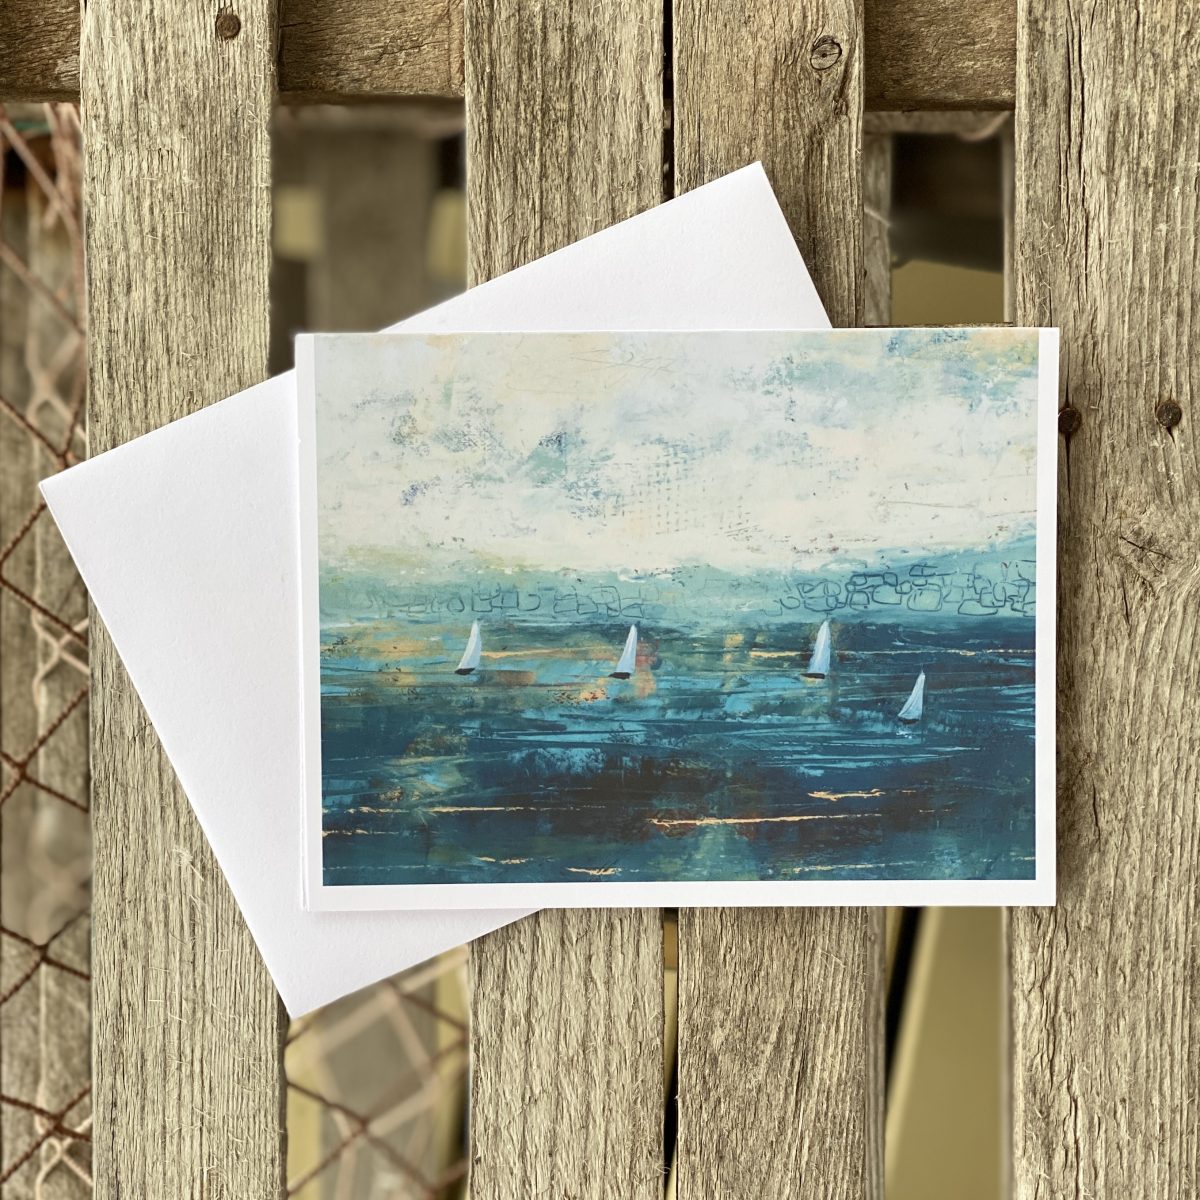 Melinda by The Sea: Everyday Cards!